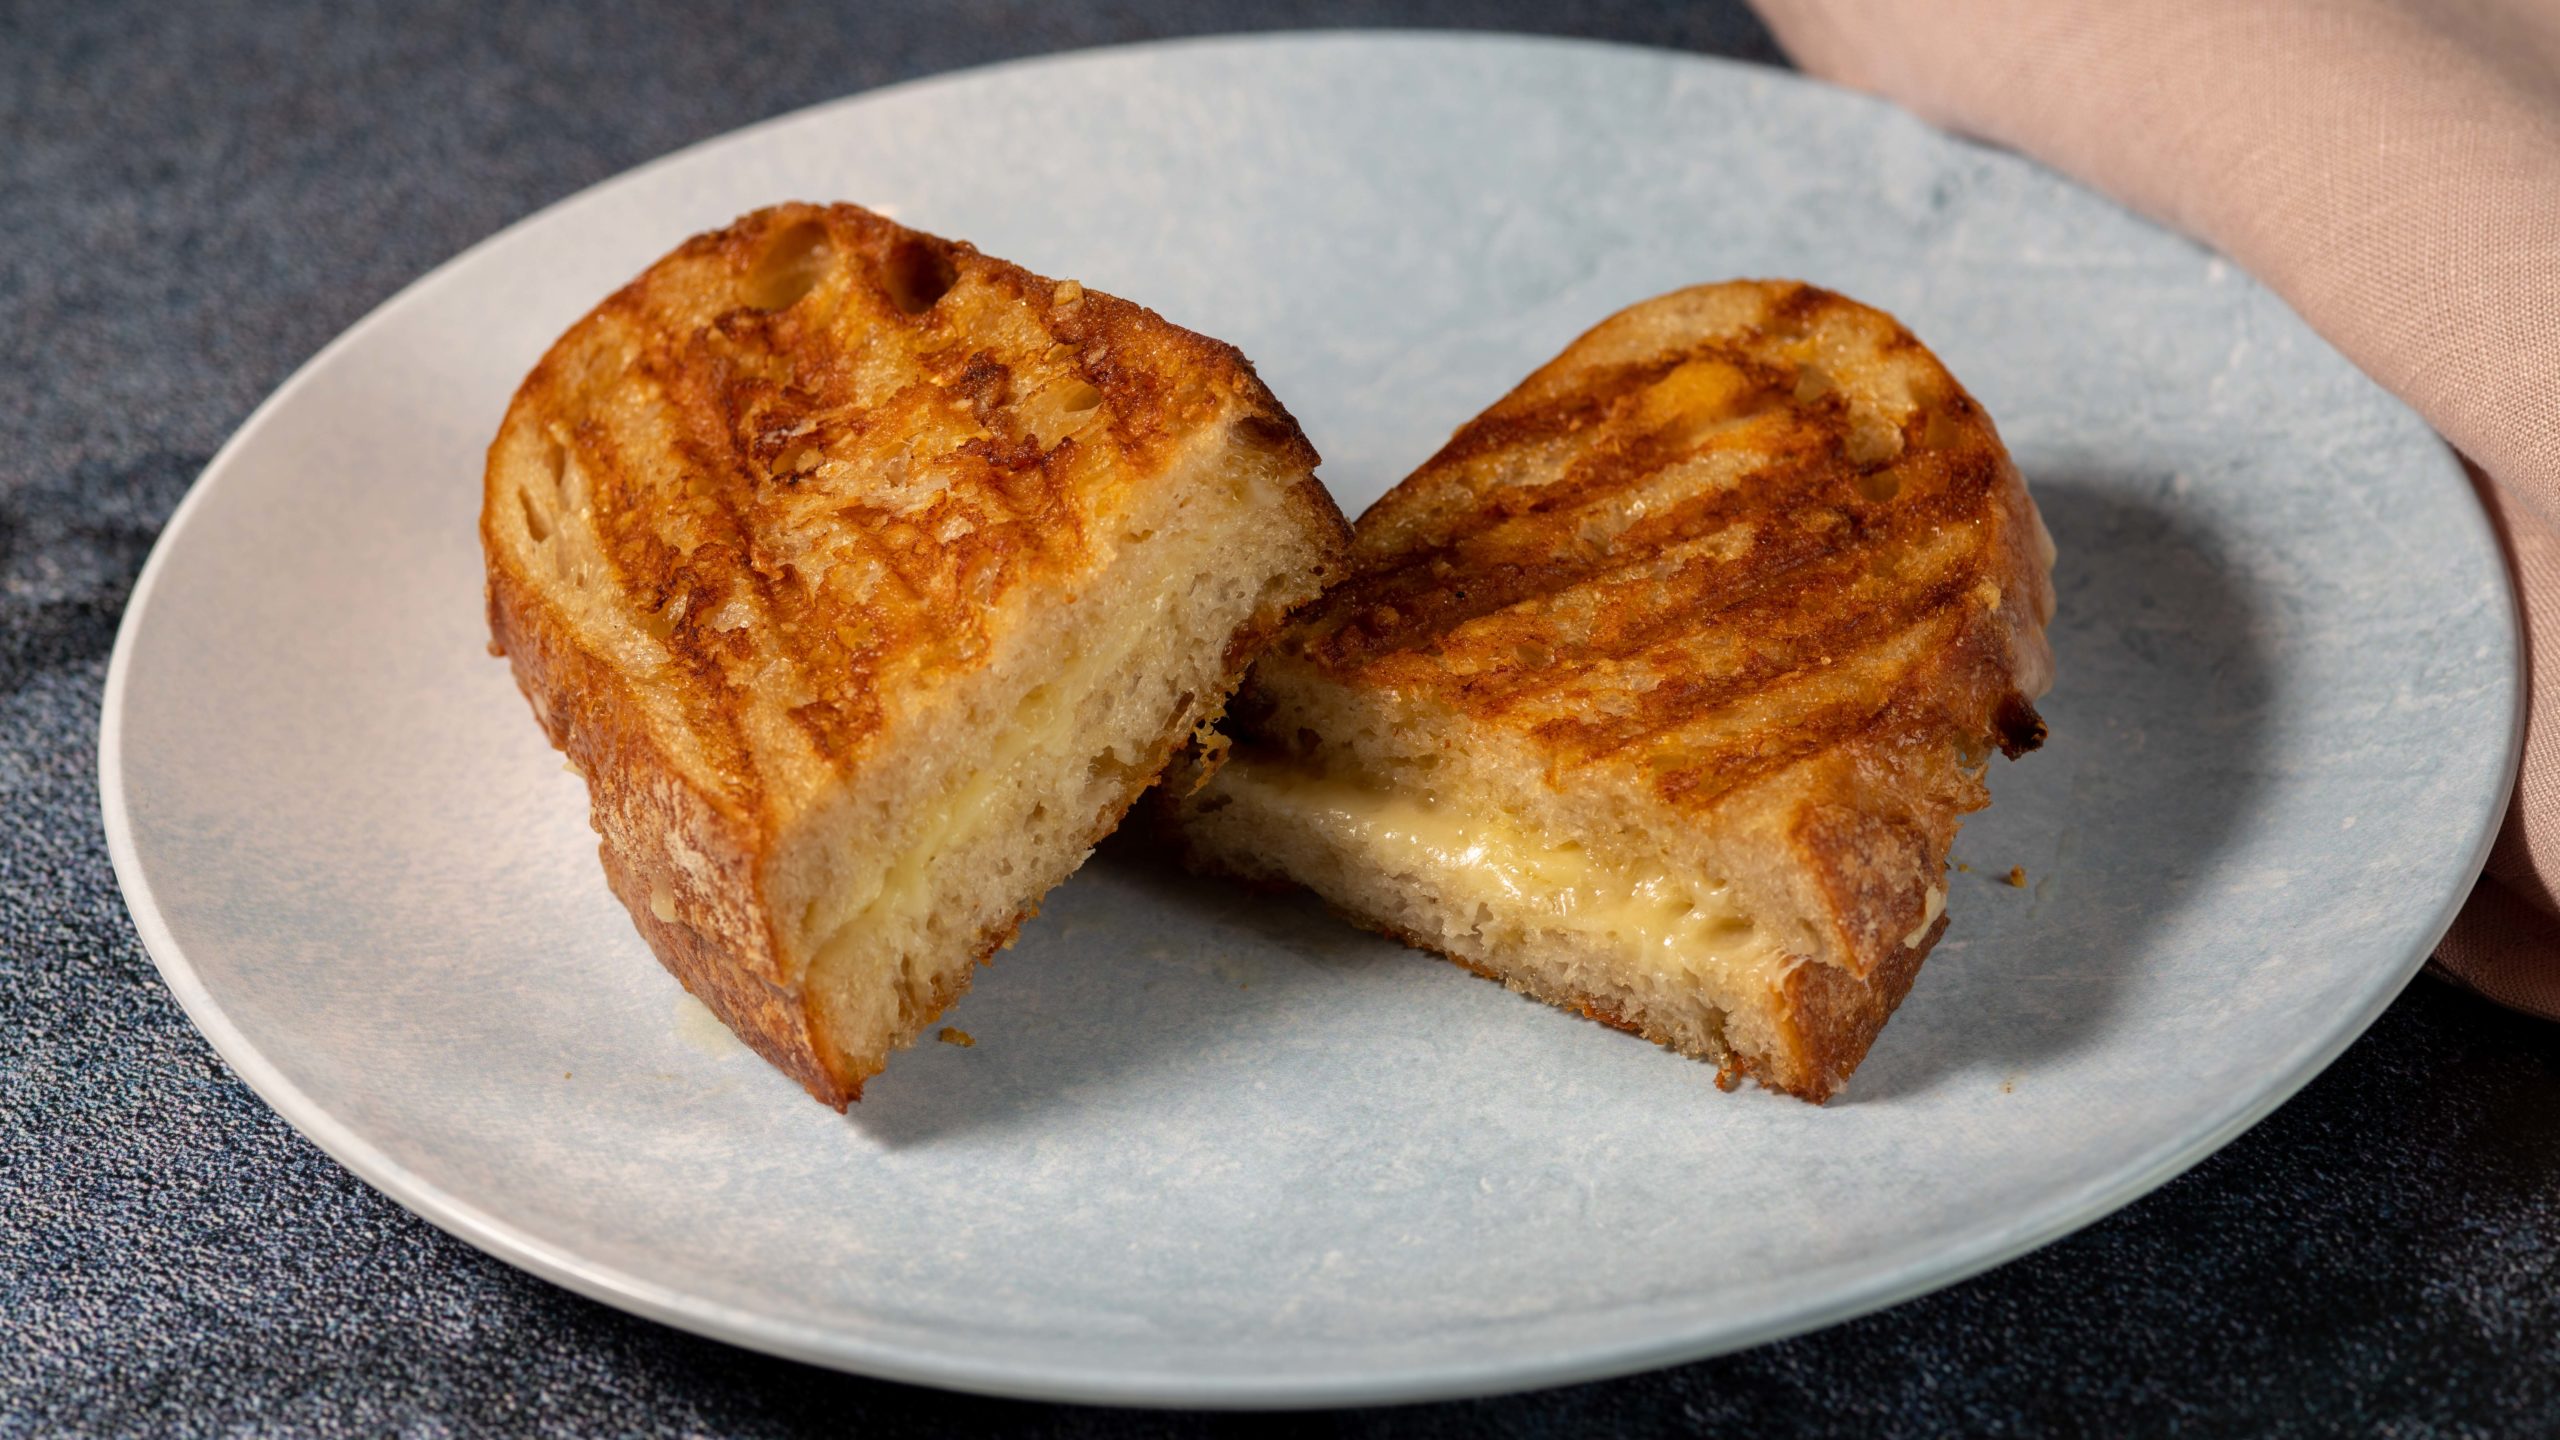 Smoked Grilled Cheese Sandwich